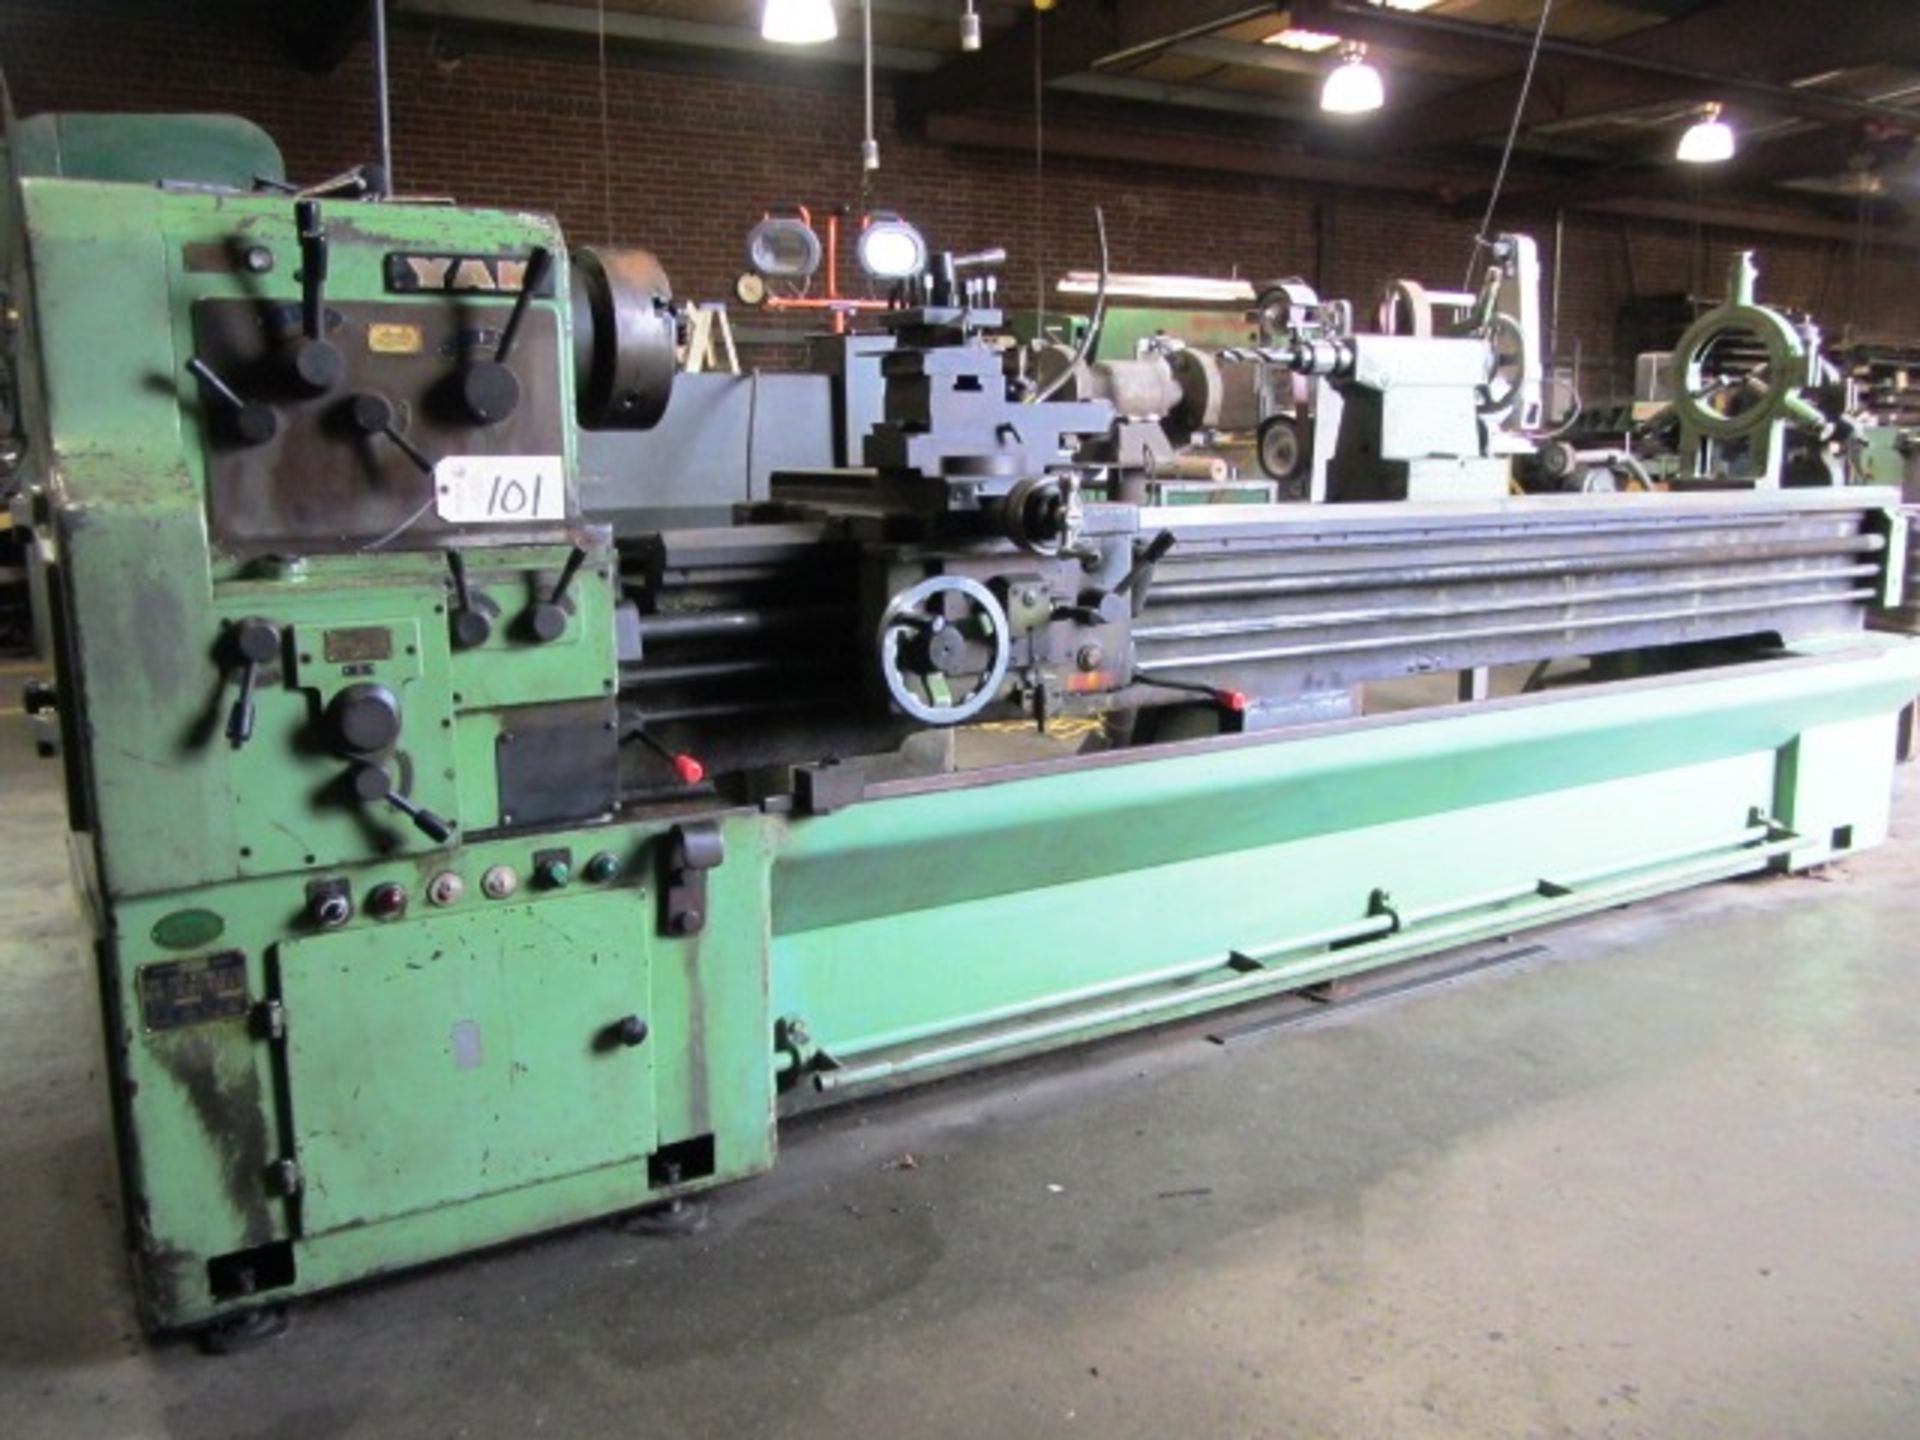 Yam 24'' Swing x 100'' Centers Engine Lathe with Approx 10'' 3-Jaw Chuck, Spindle Speeds to 1500